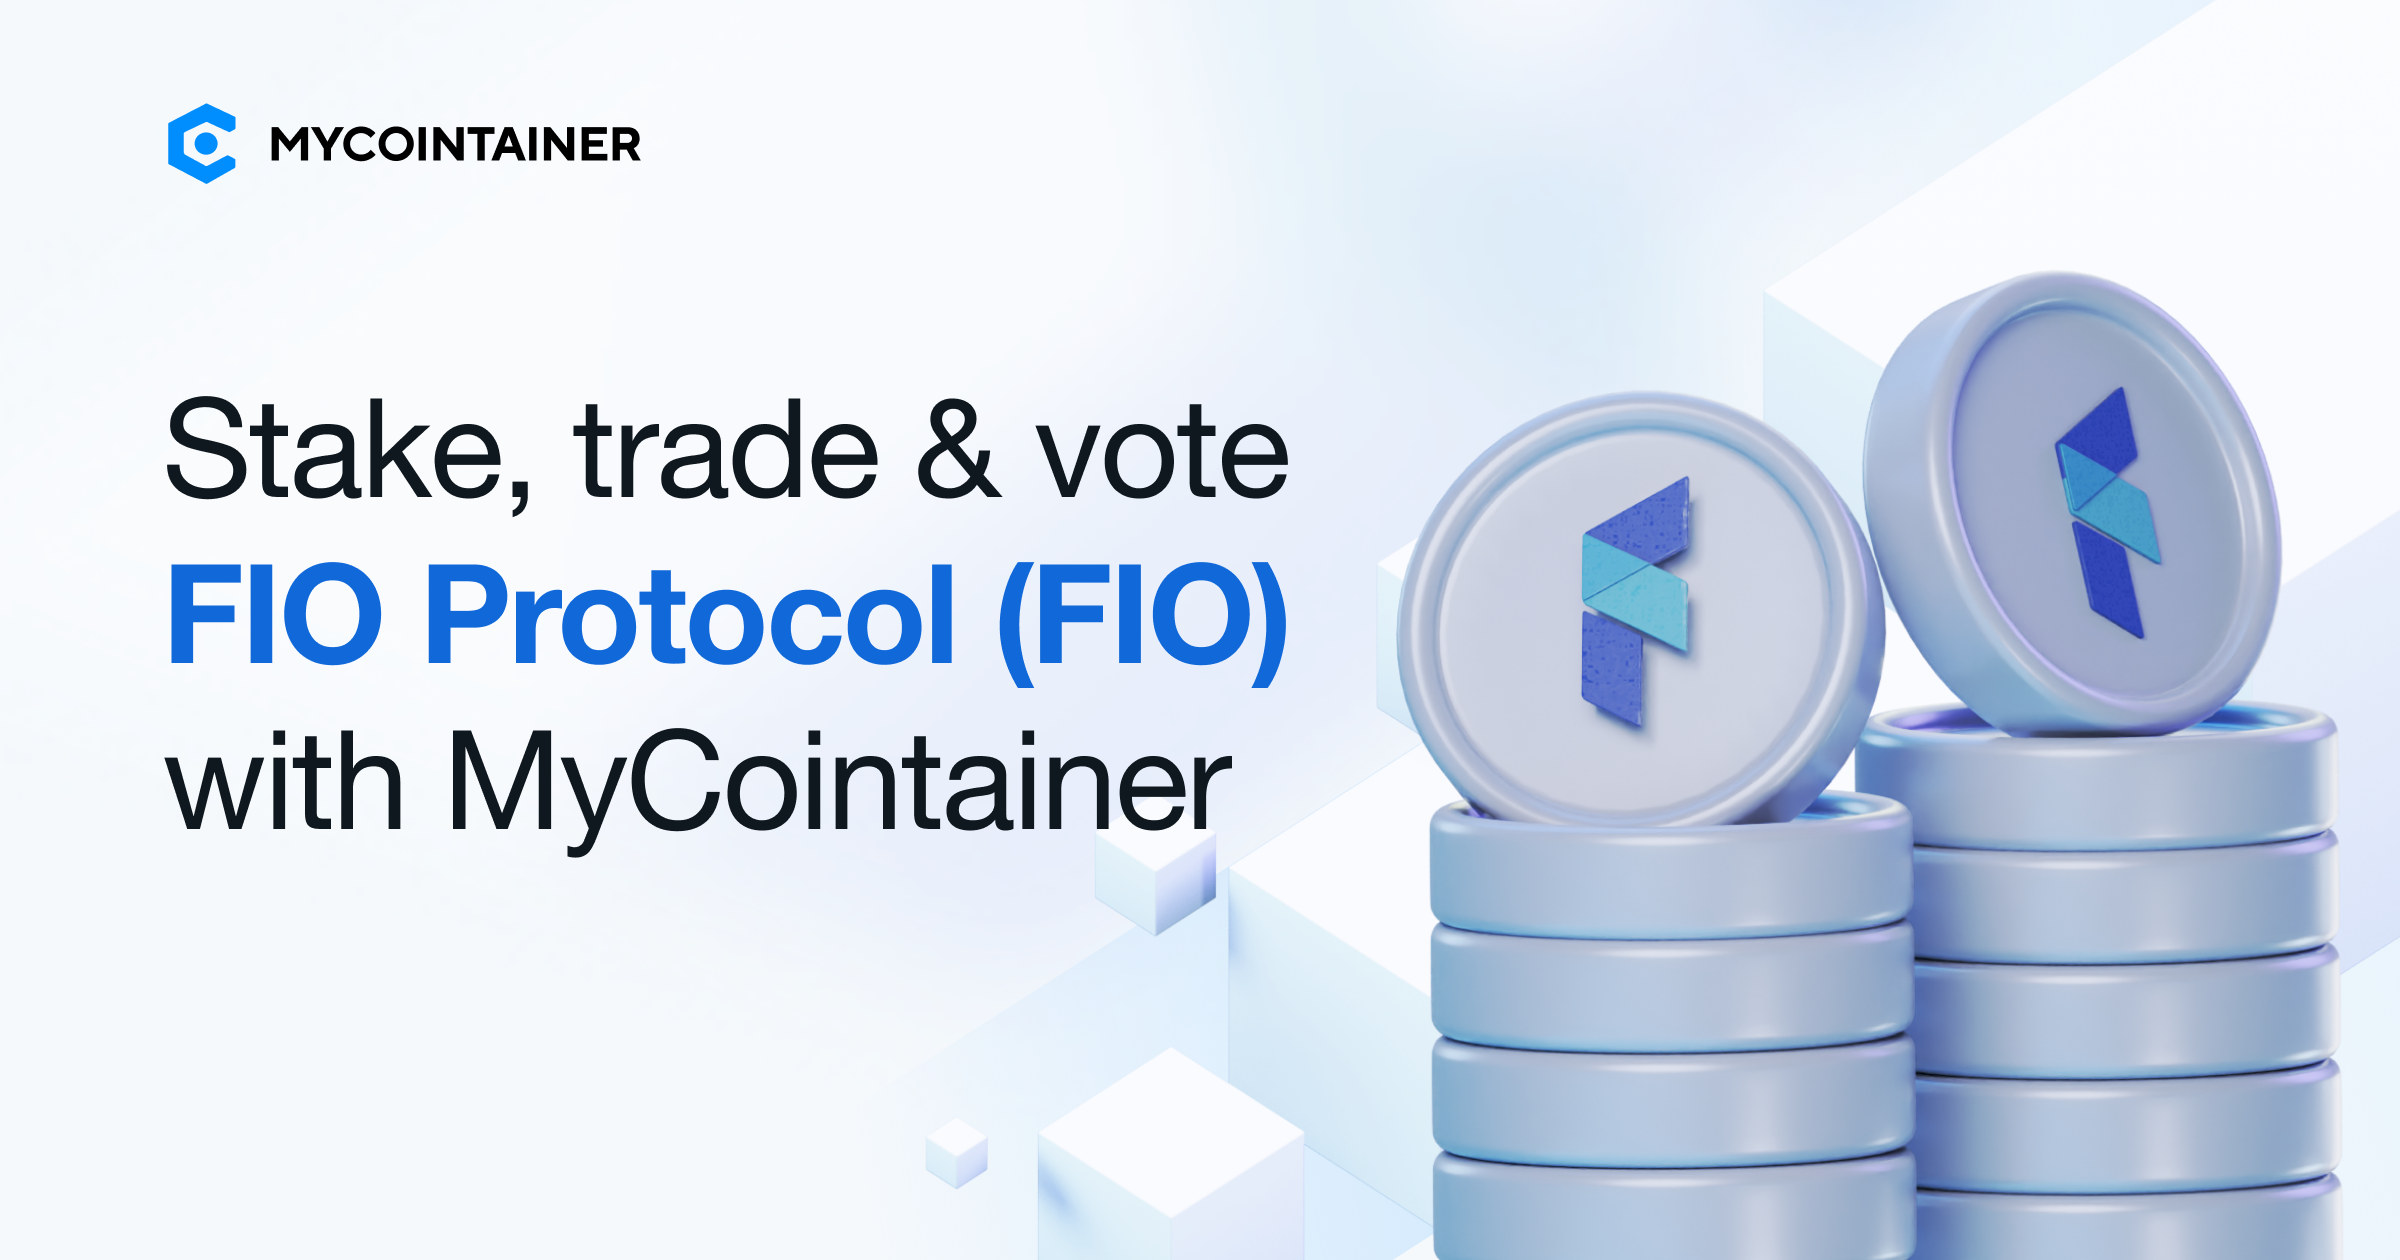 MyCointainer has officially launched: FIO Token Support, FIO Staking